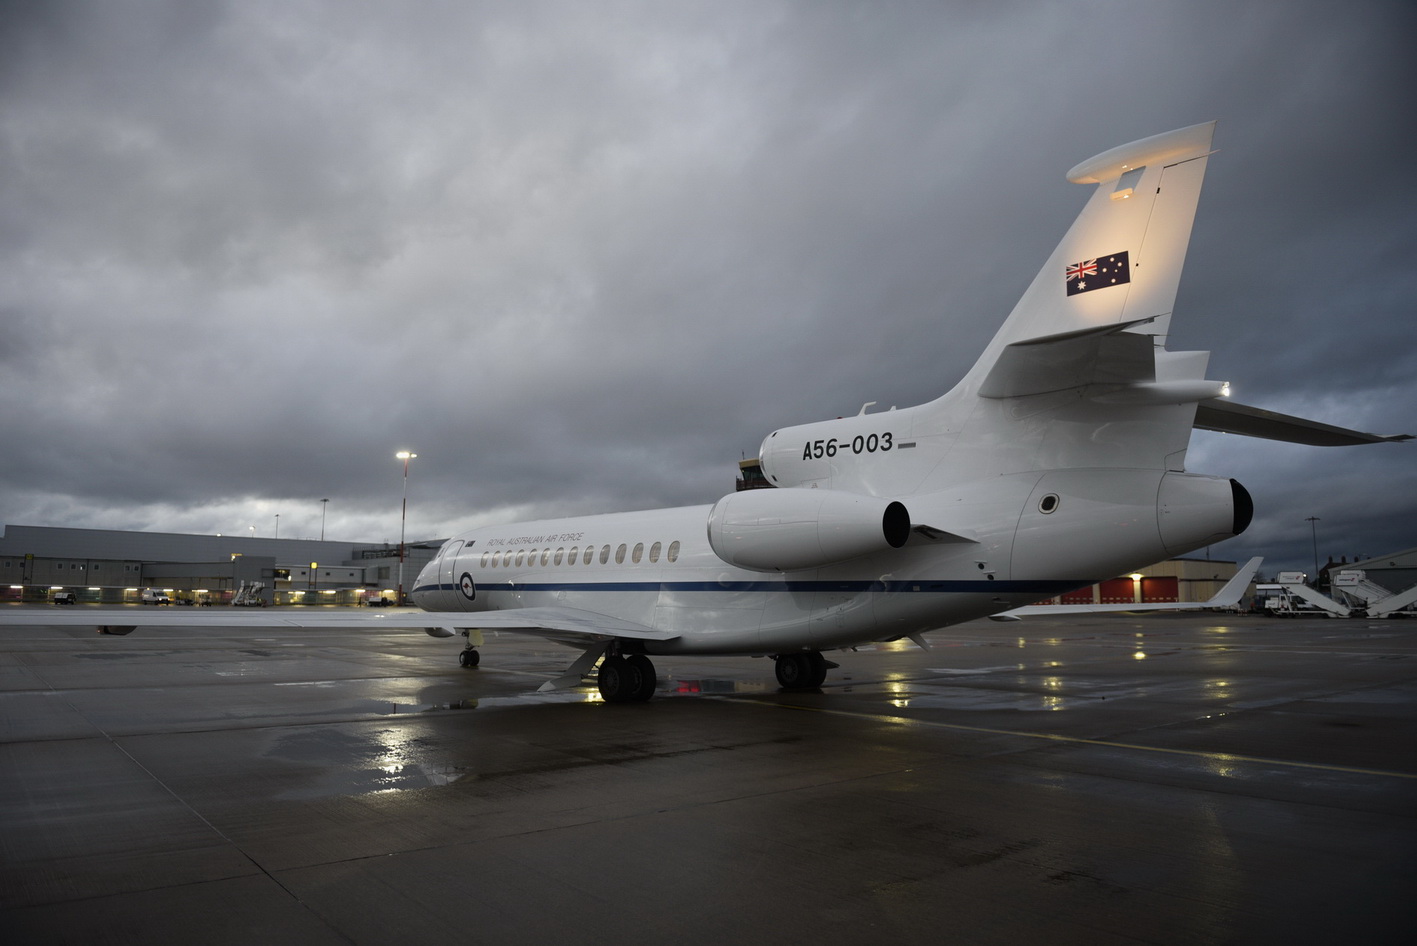 Private jet at JLA Airport for departure from G7 Summit Liverpool image